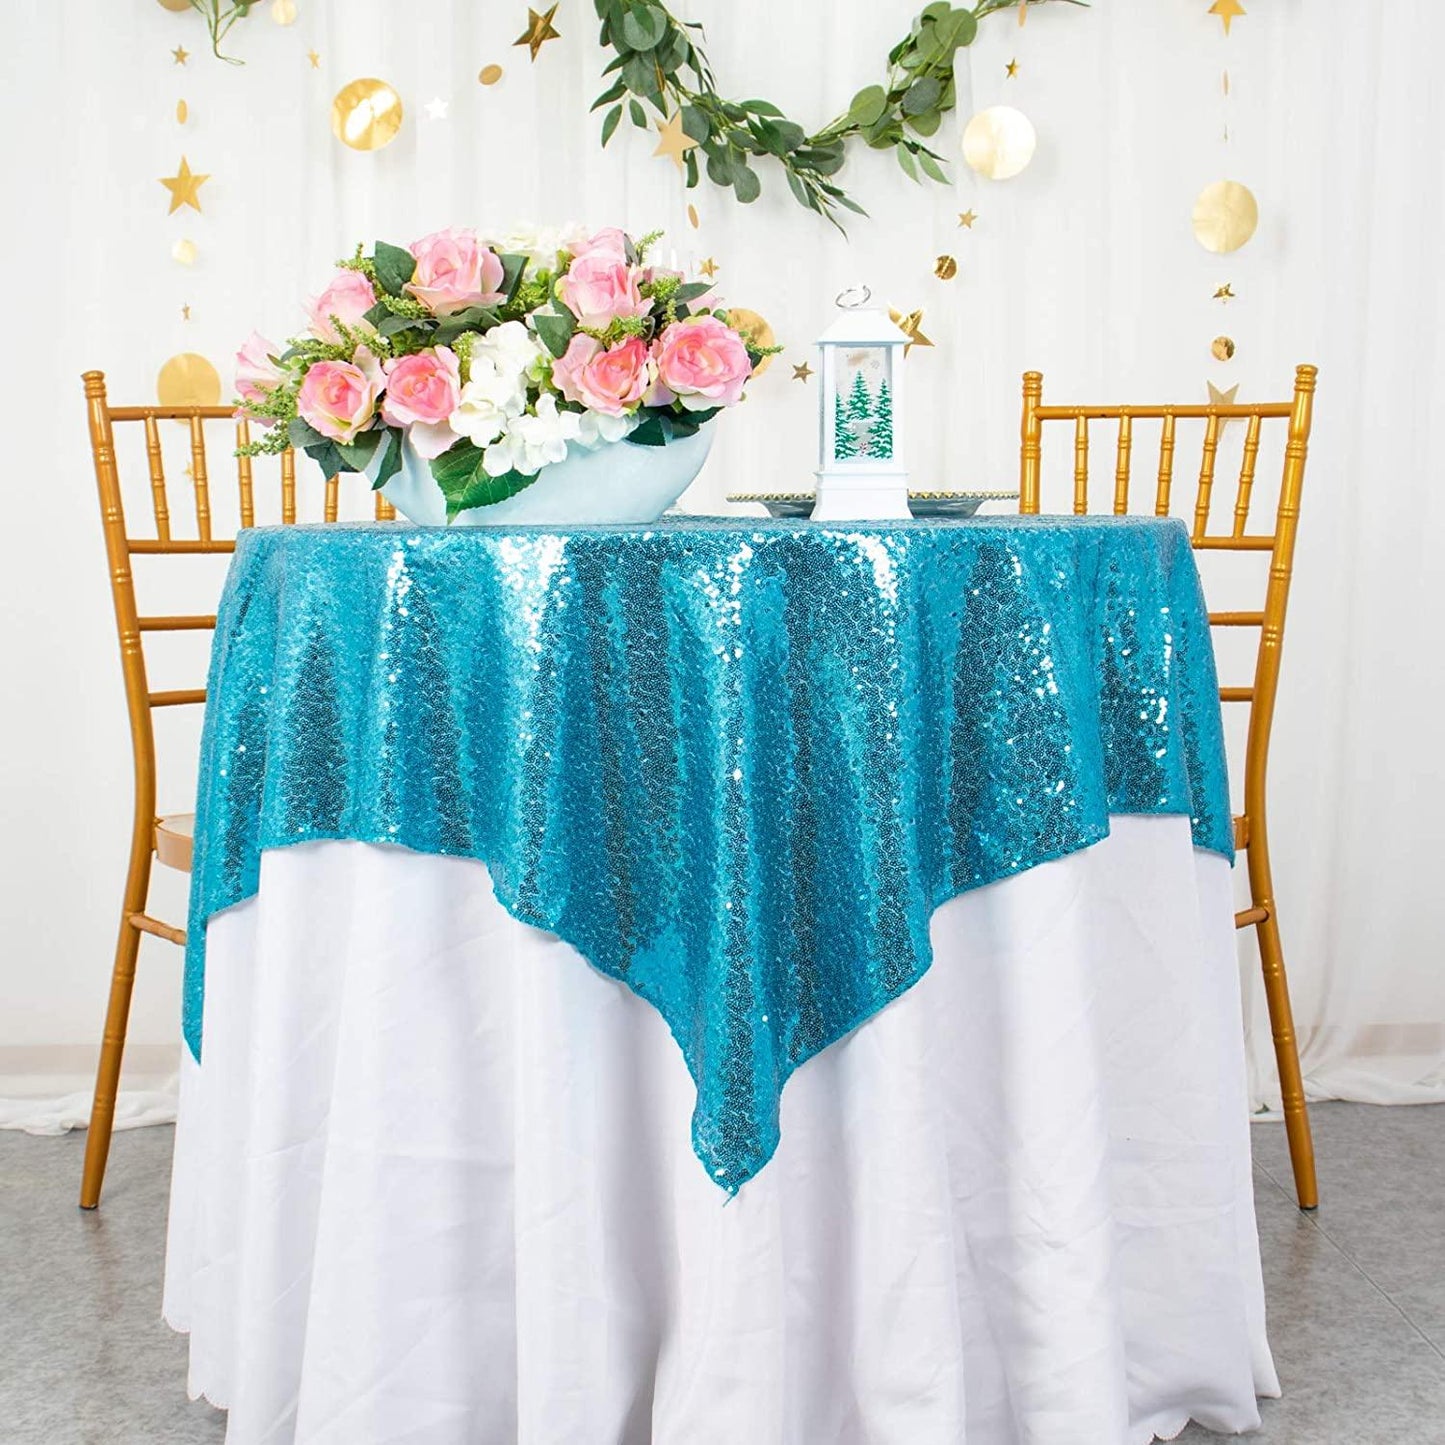 Tablecloth-Gold Sequin Table Overlay and Sequin Tablecloth/Linen for Wedding/Party/Event - If you say i do